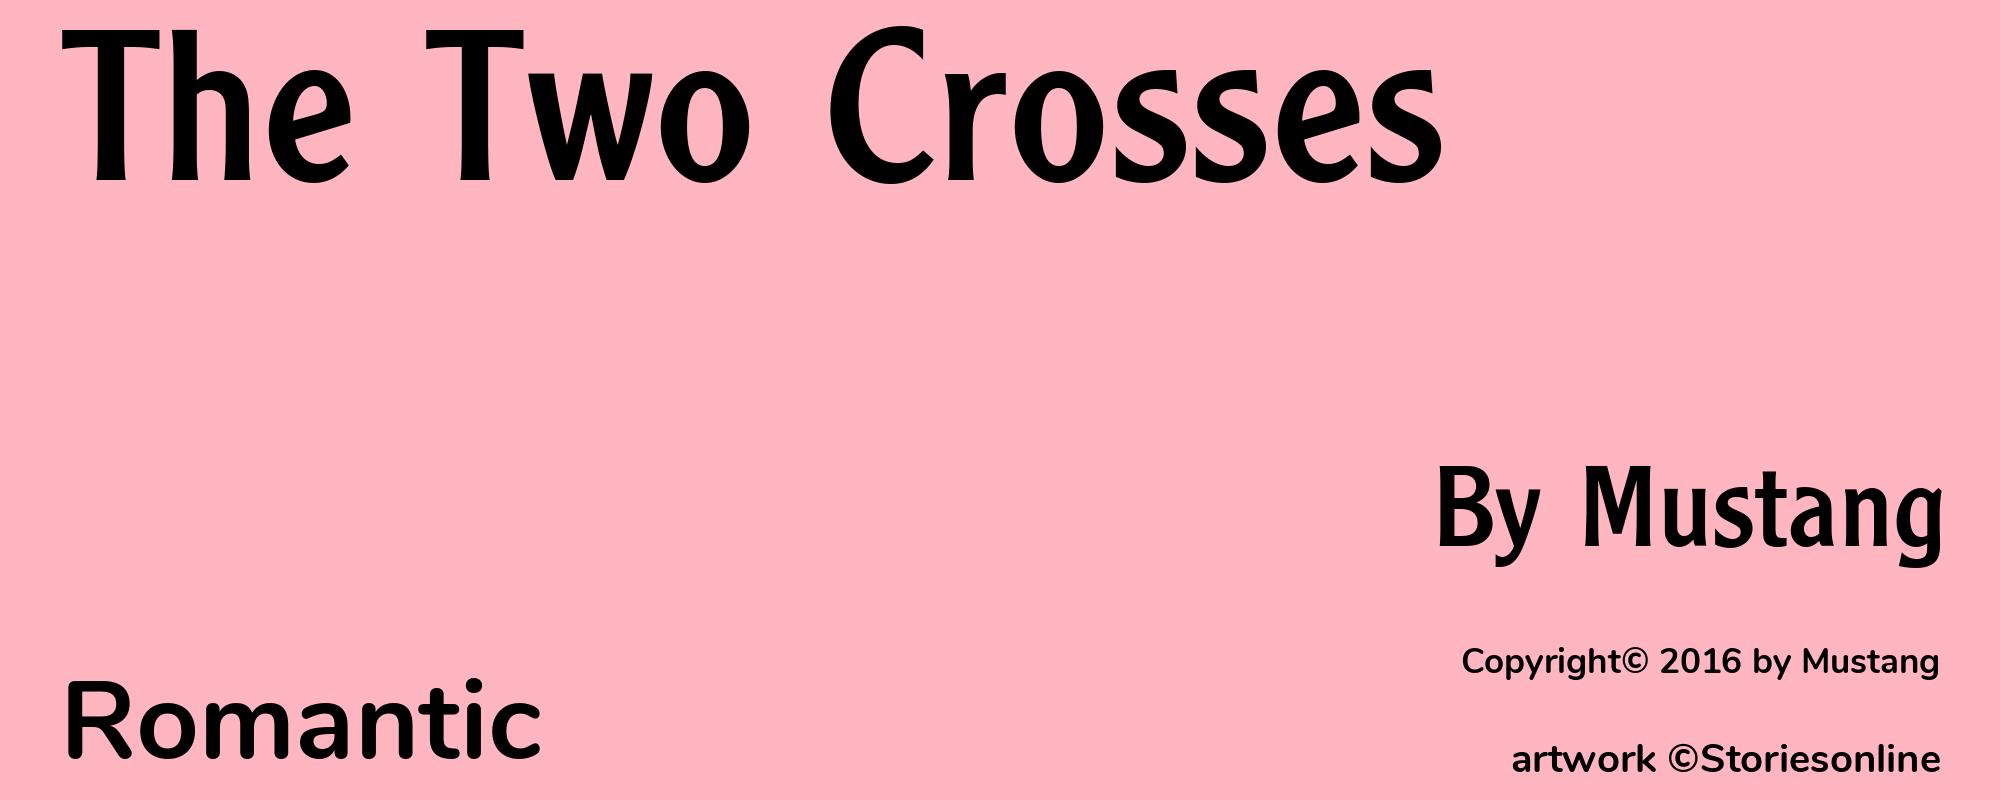 The Two Crosses - Cover